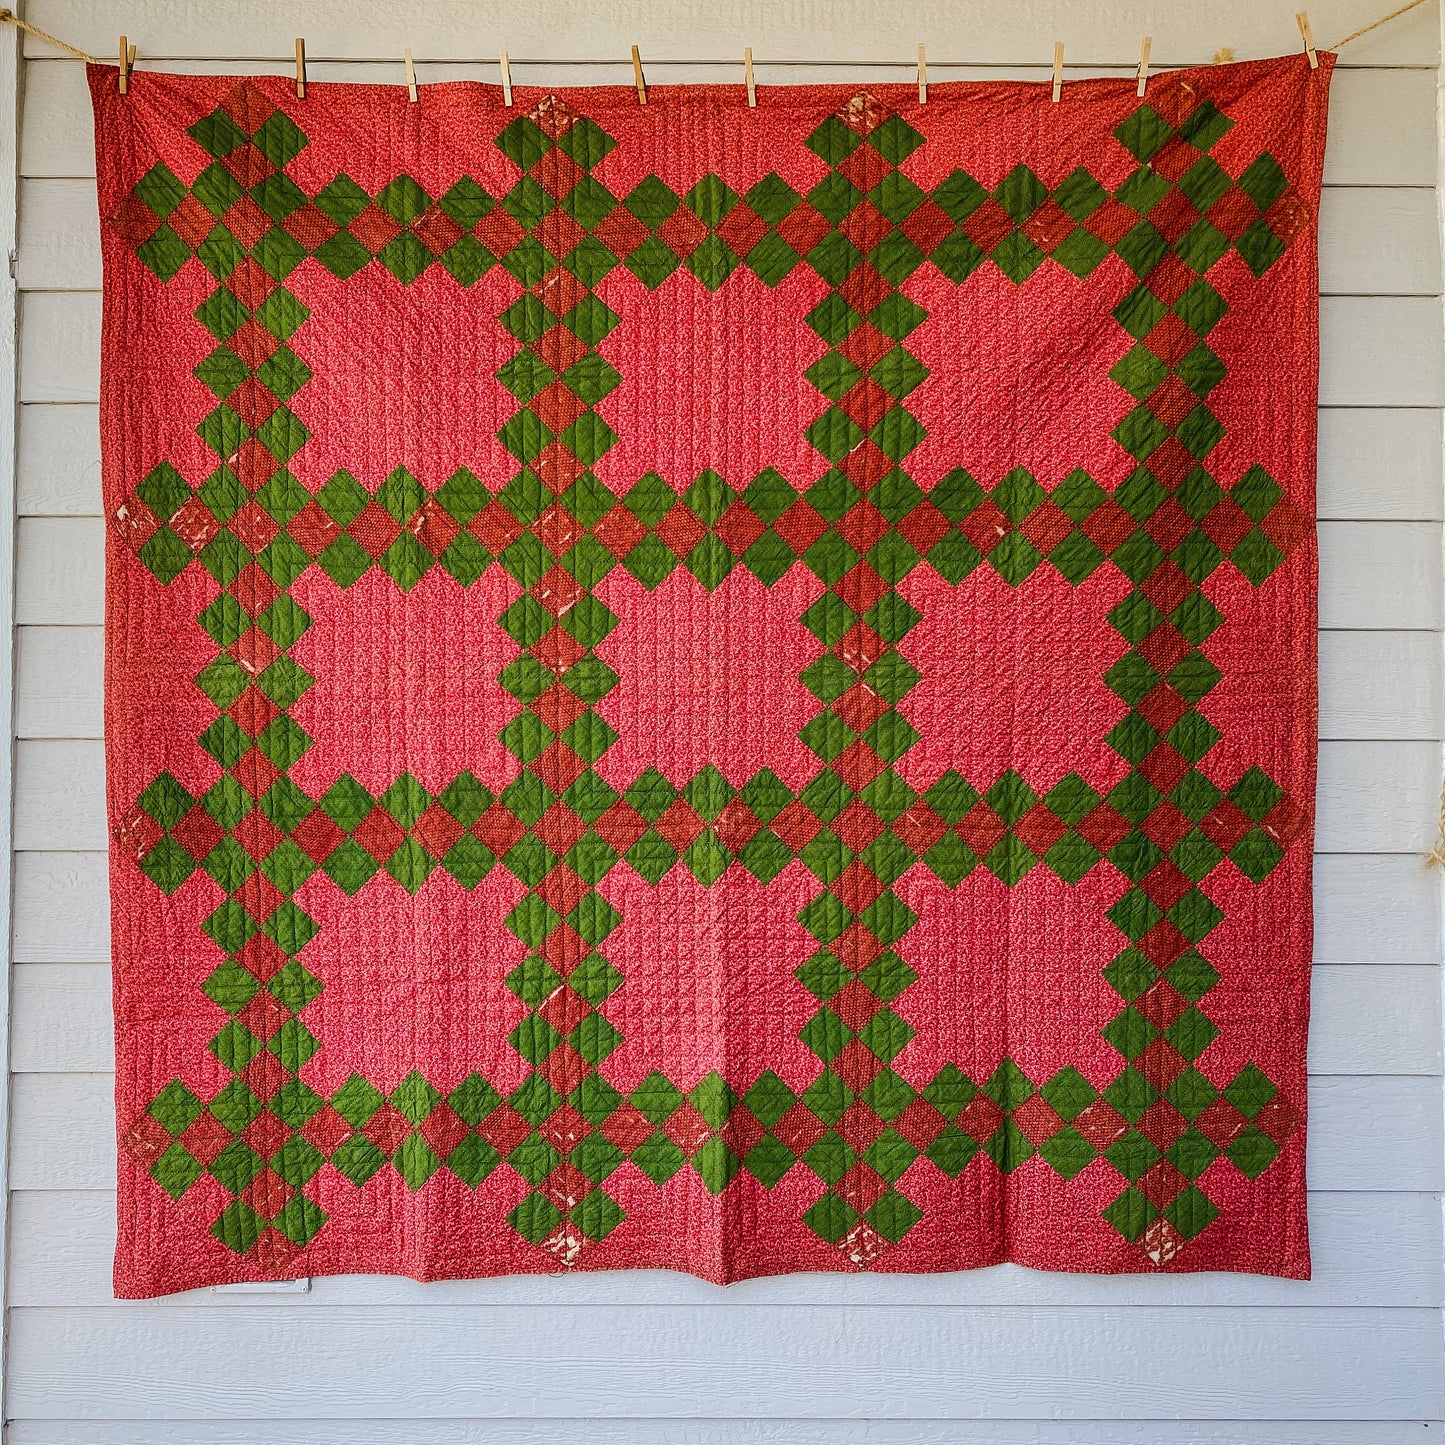 Antique Red and Green Irish Chain Quilt, c1880s, 74" x 73"